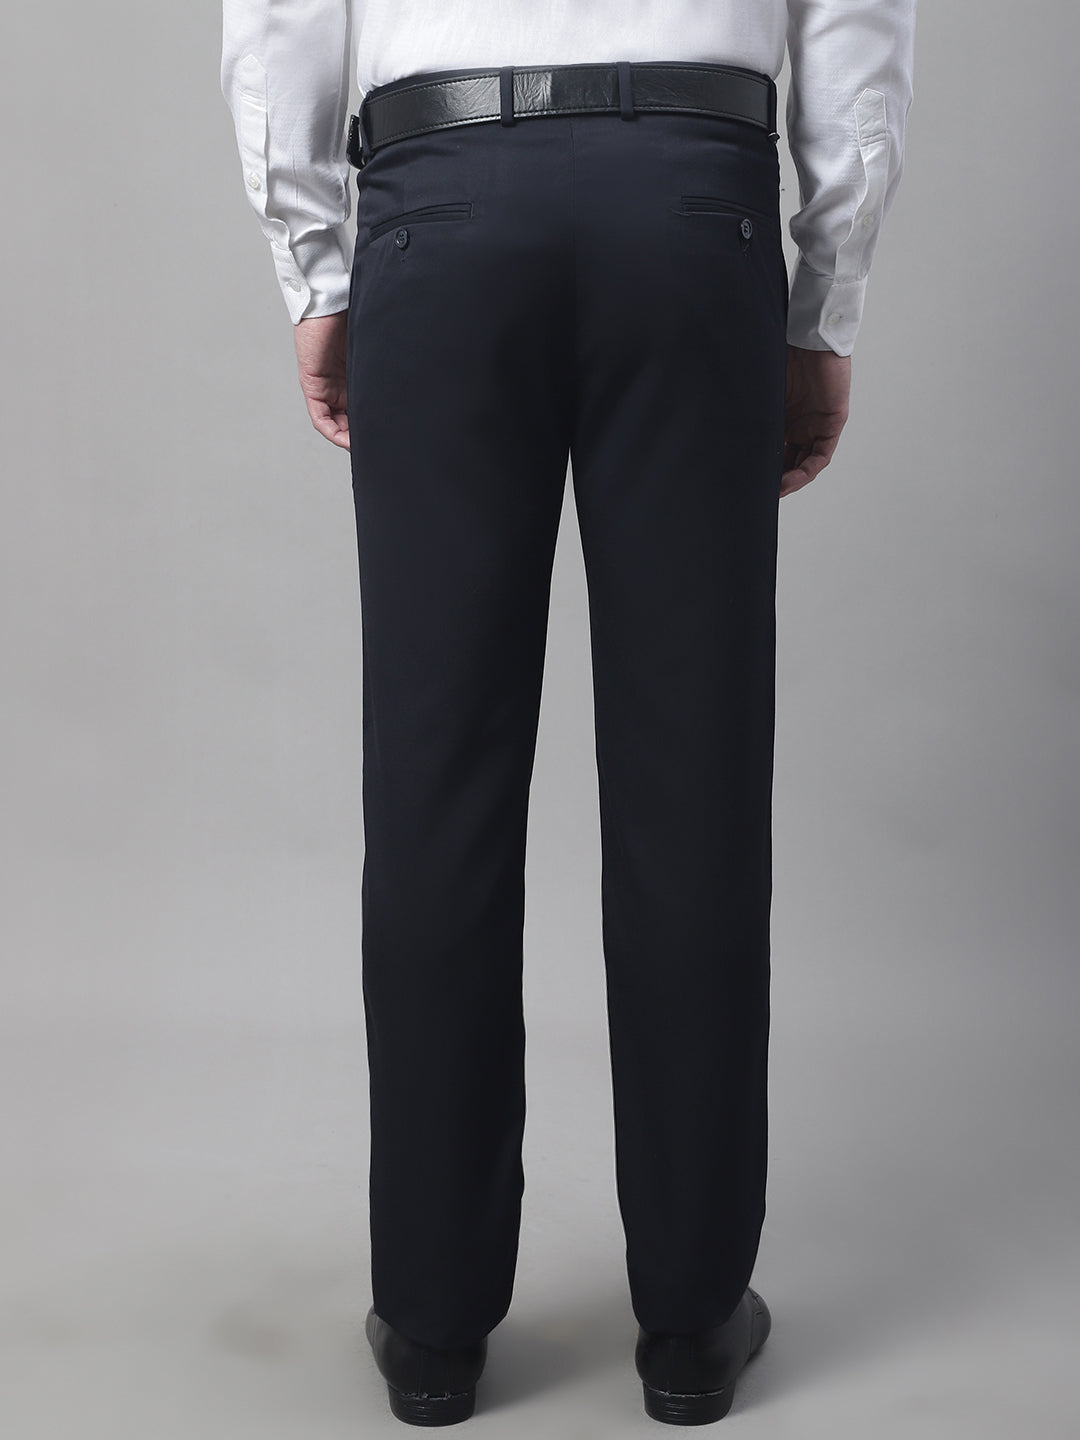 Cantabil Trousers  Buy Cantabil Trousers online in India